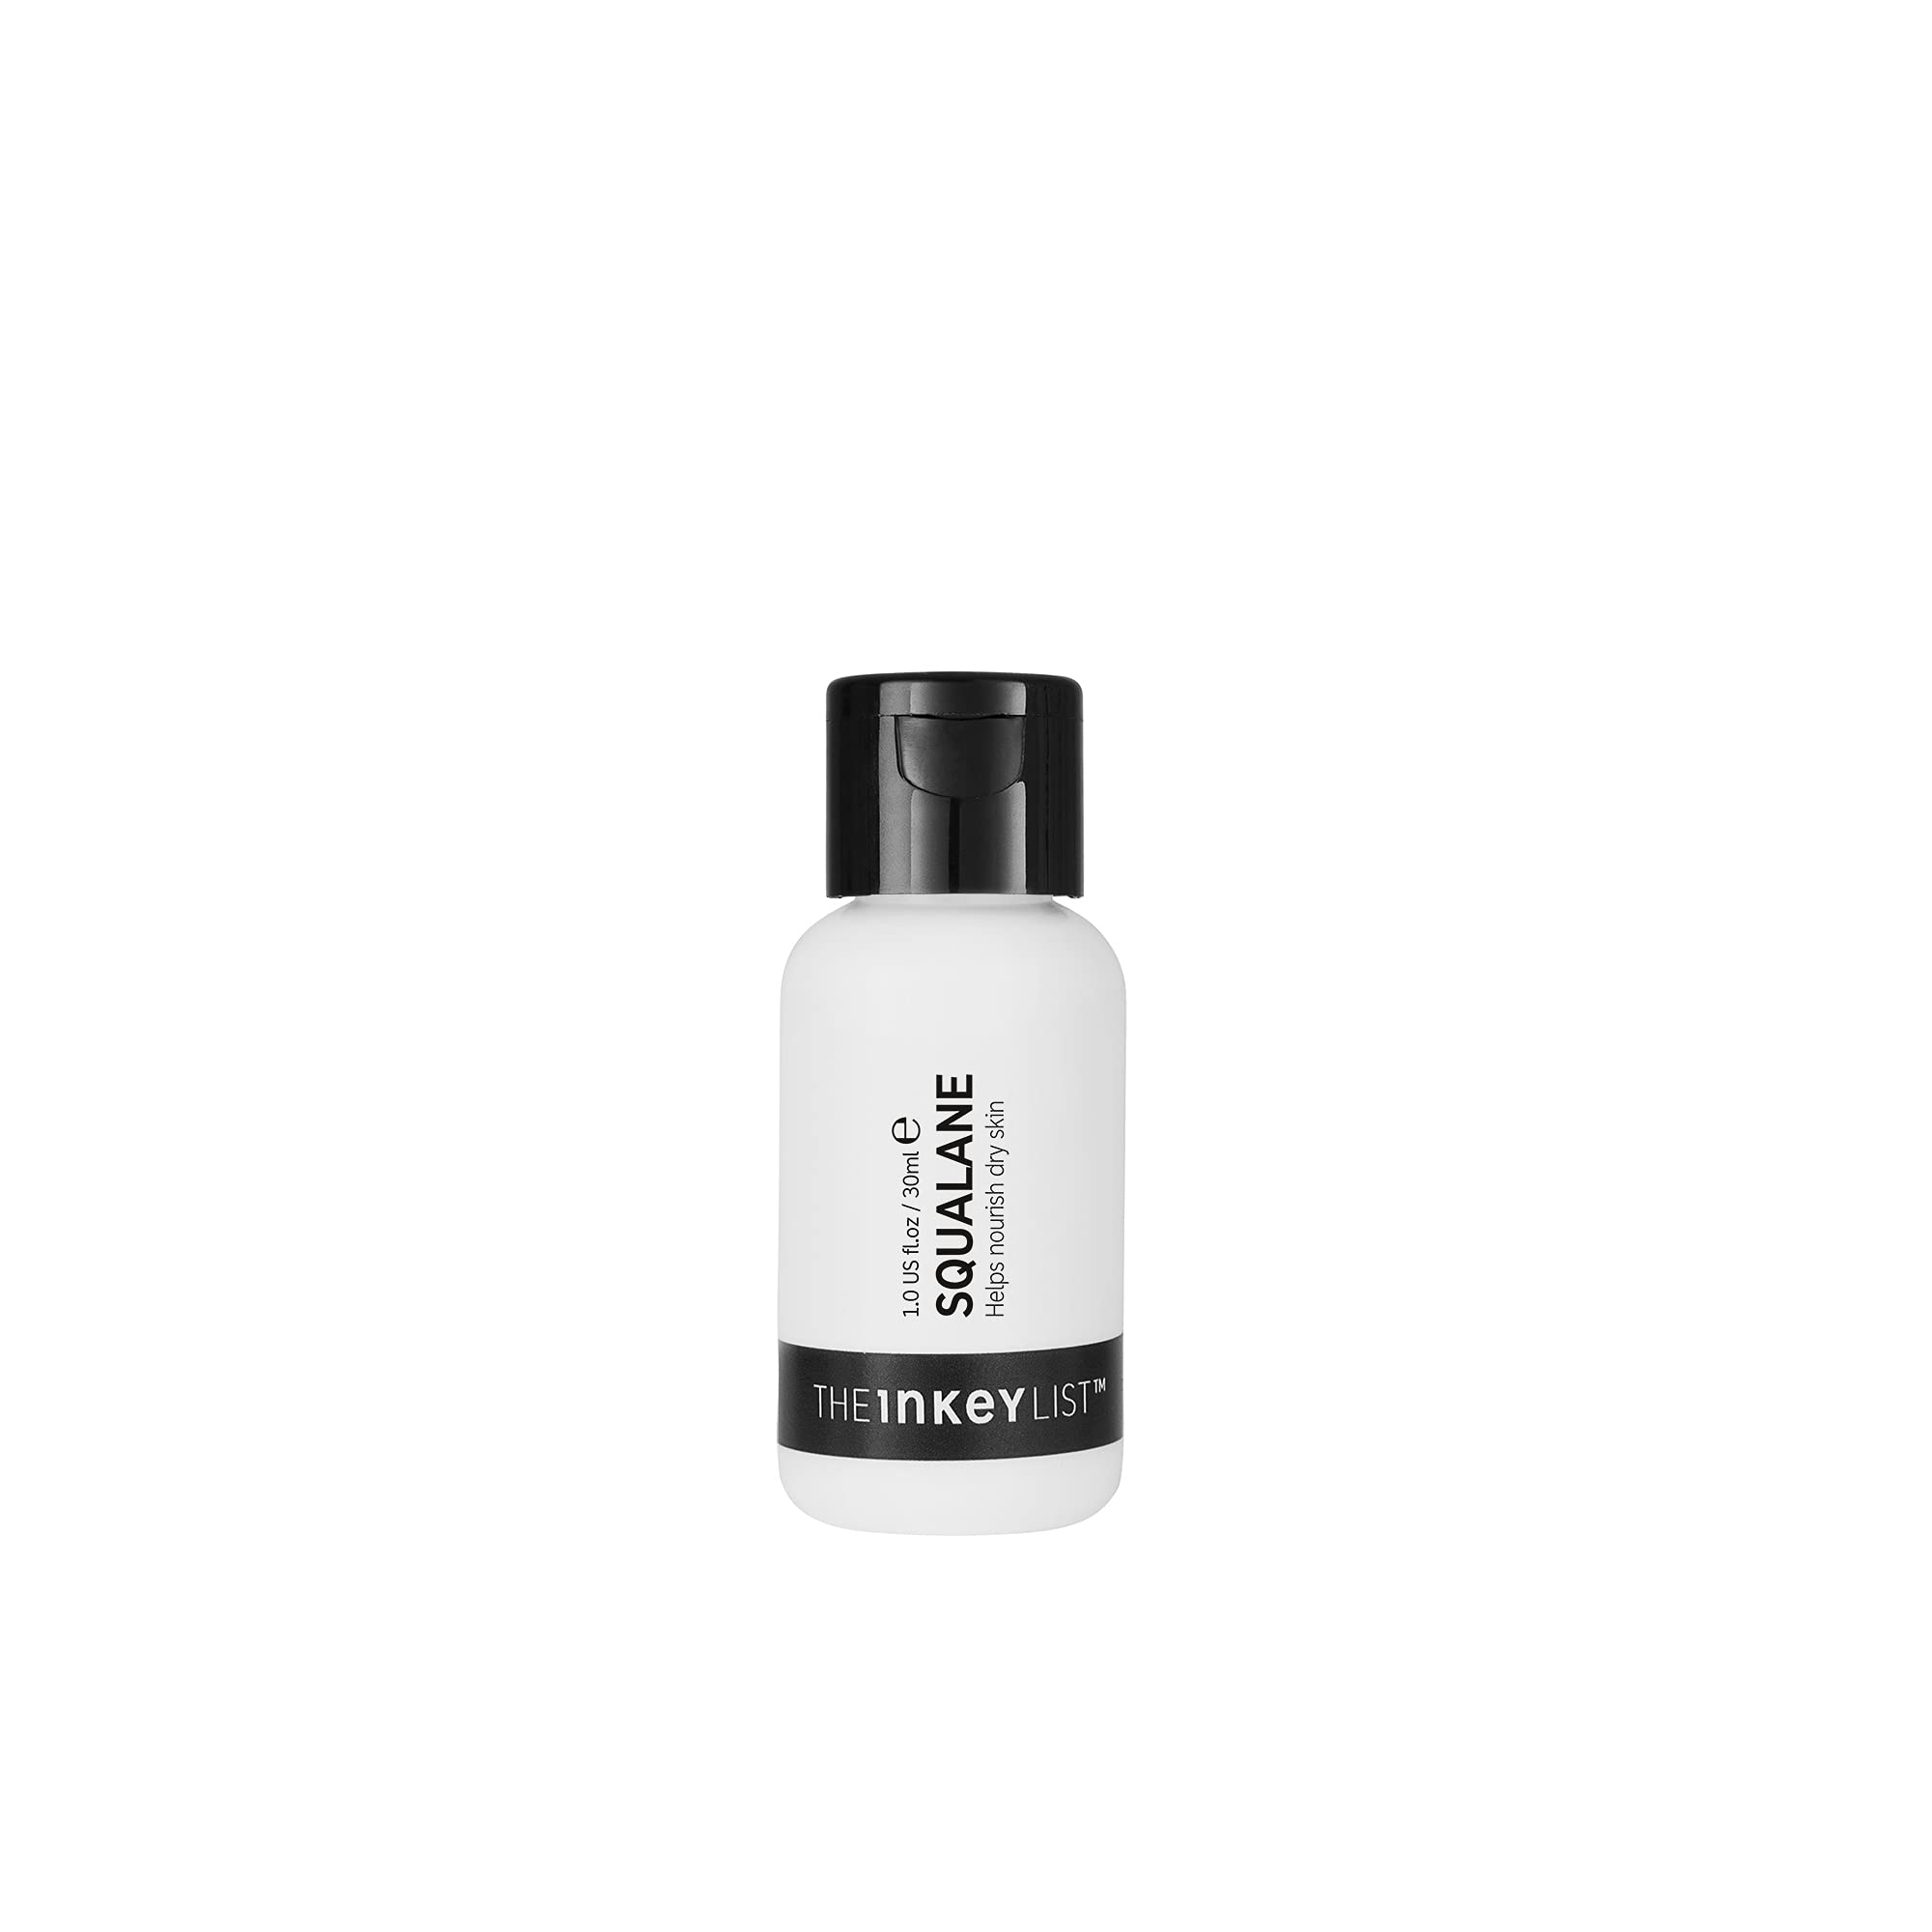 The INKEY List 100% Plant Derived Squalane to Hydrate Skin and Control Oil Production, 30 ml